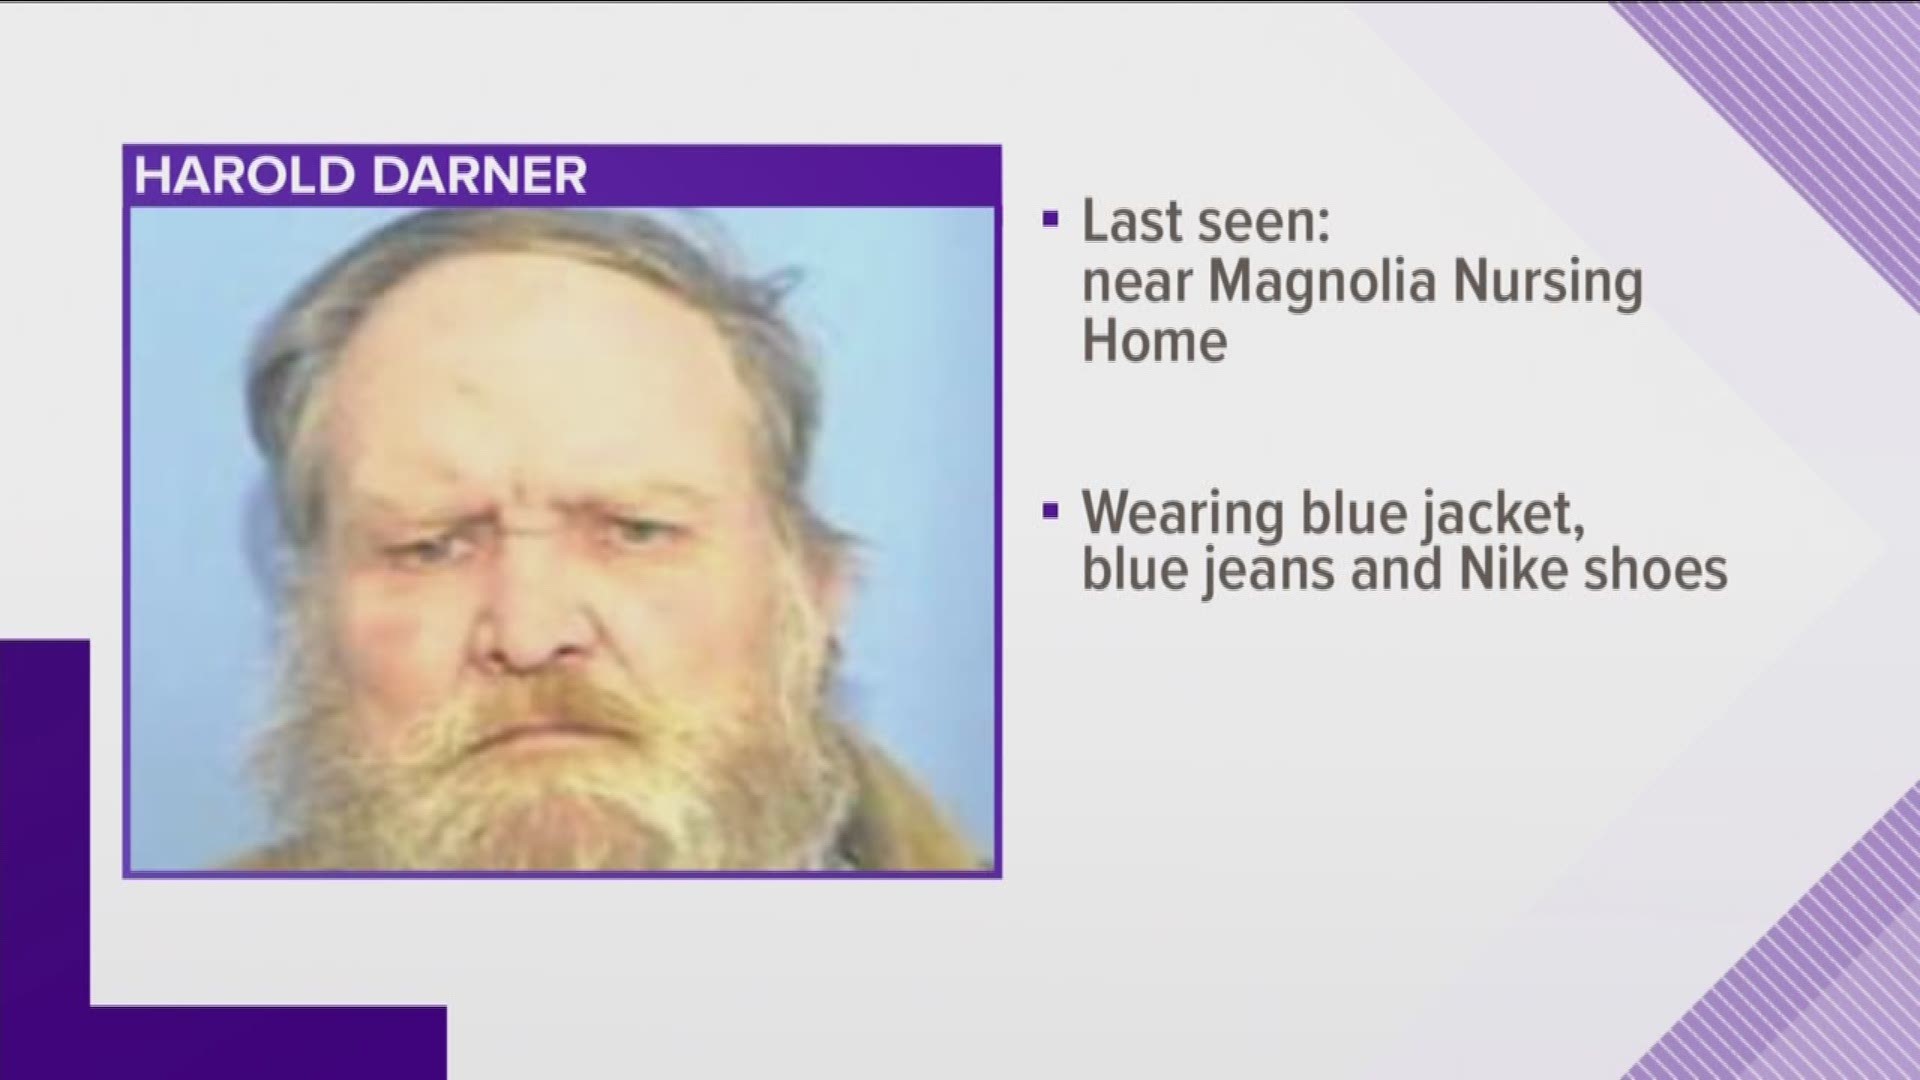 LRPD wants your help searching for this man, 72-year-old Harold Darner.